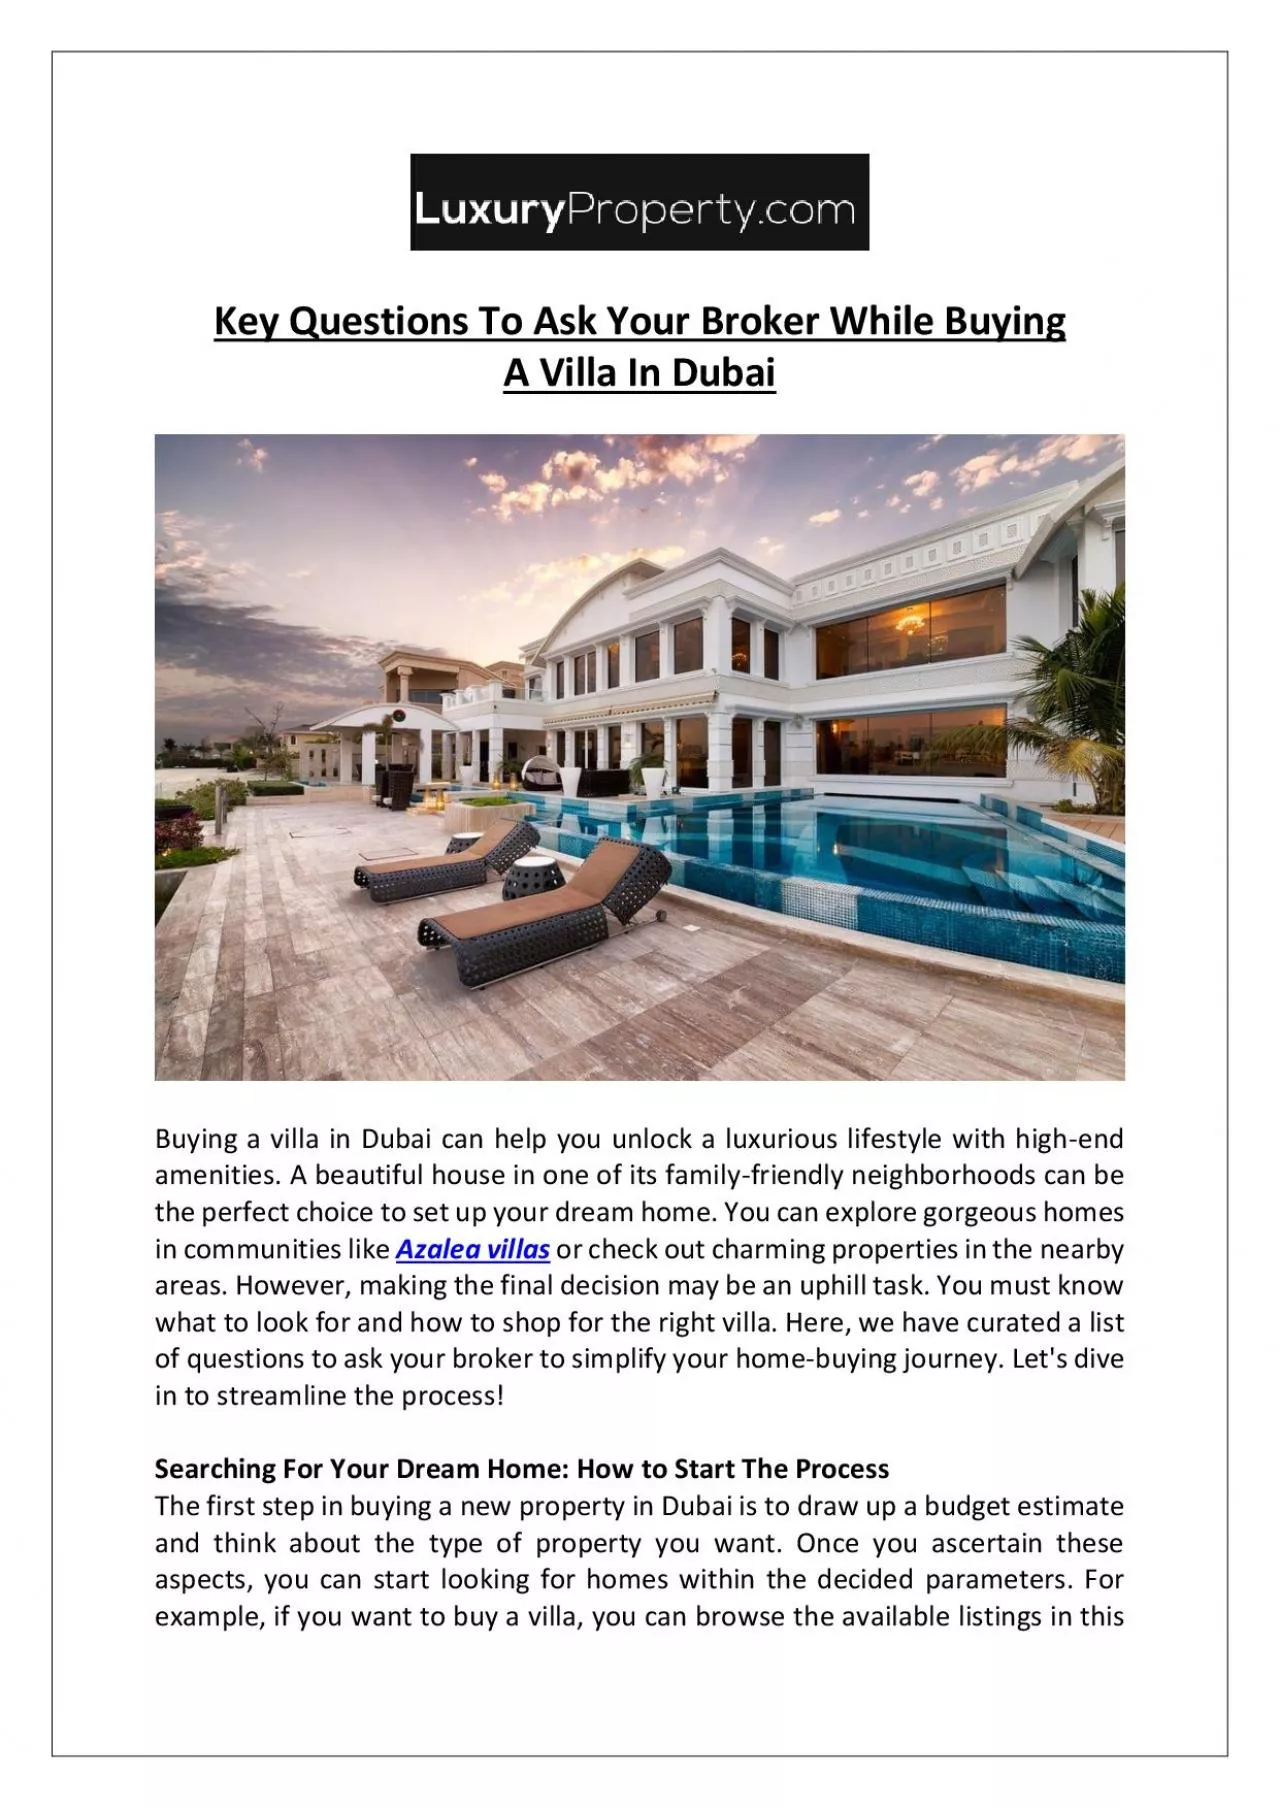 Key Questions To Ask Your Broker While Buying A Villa In Dubai